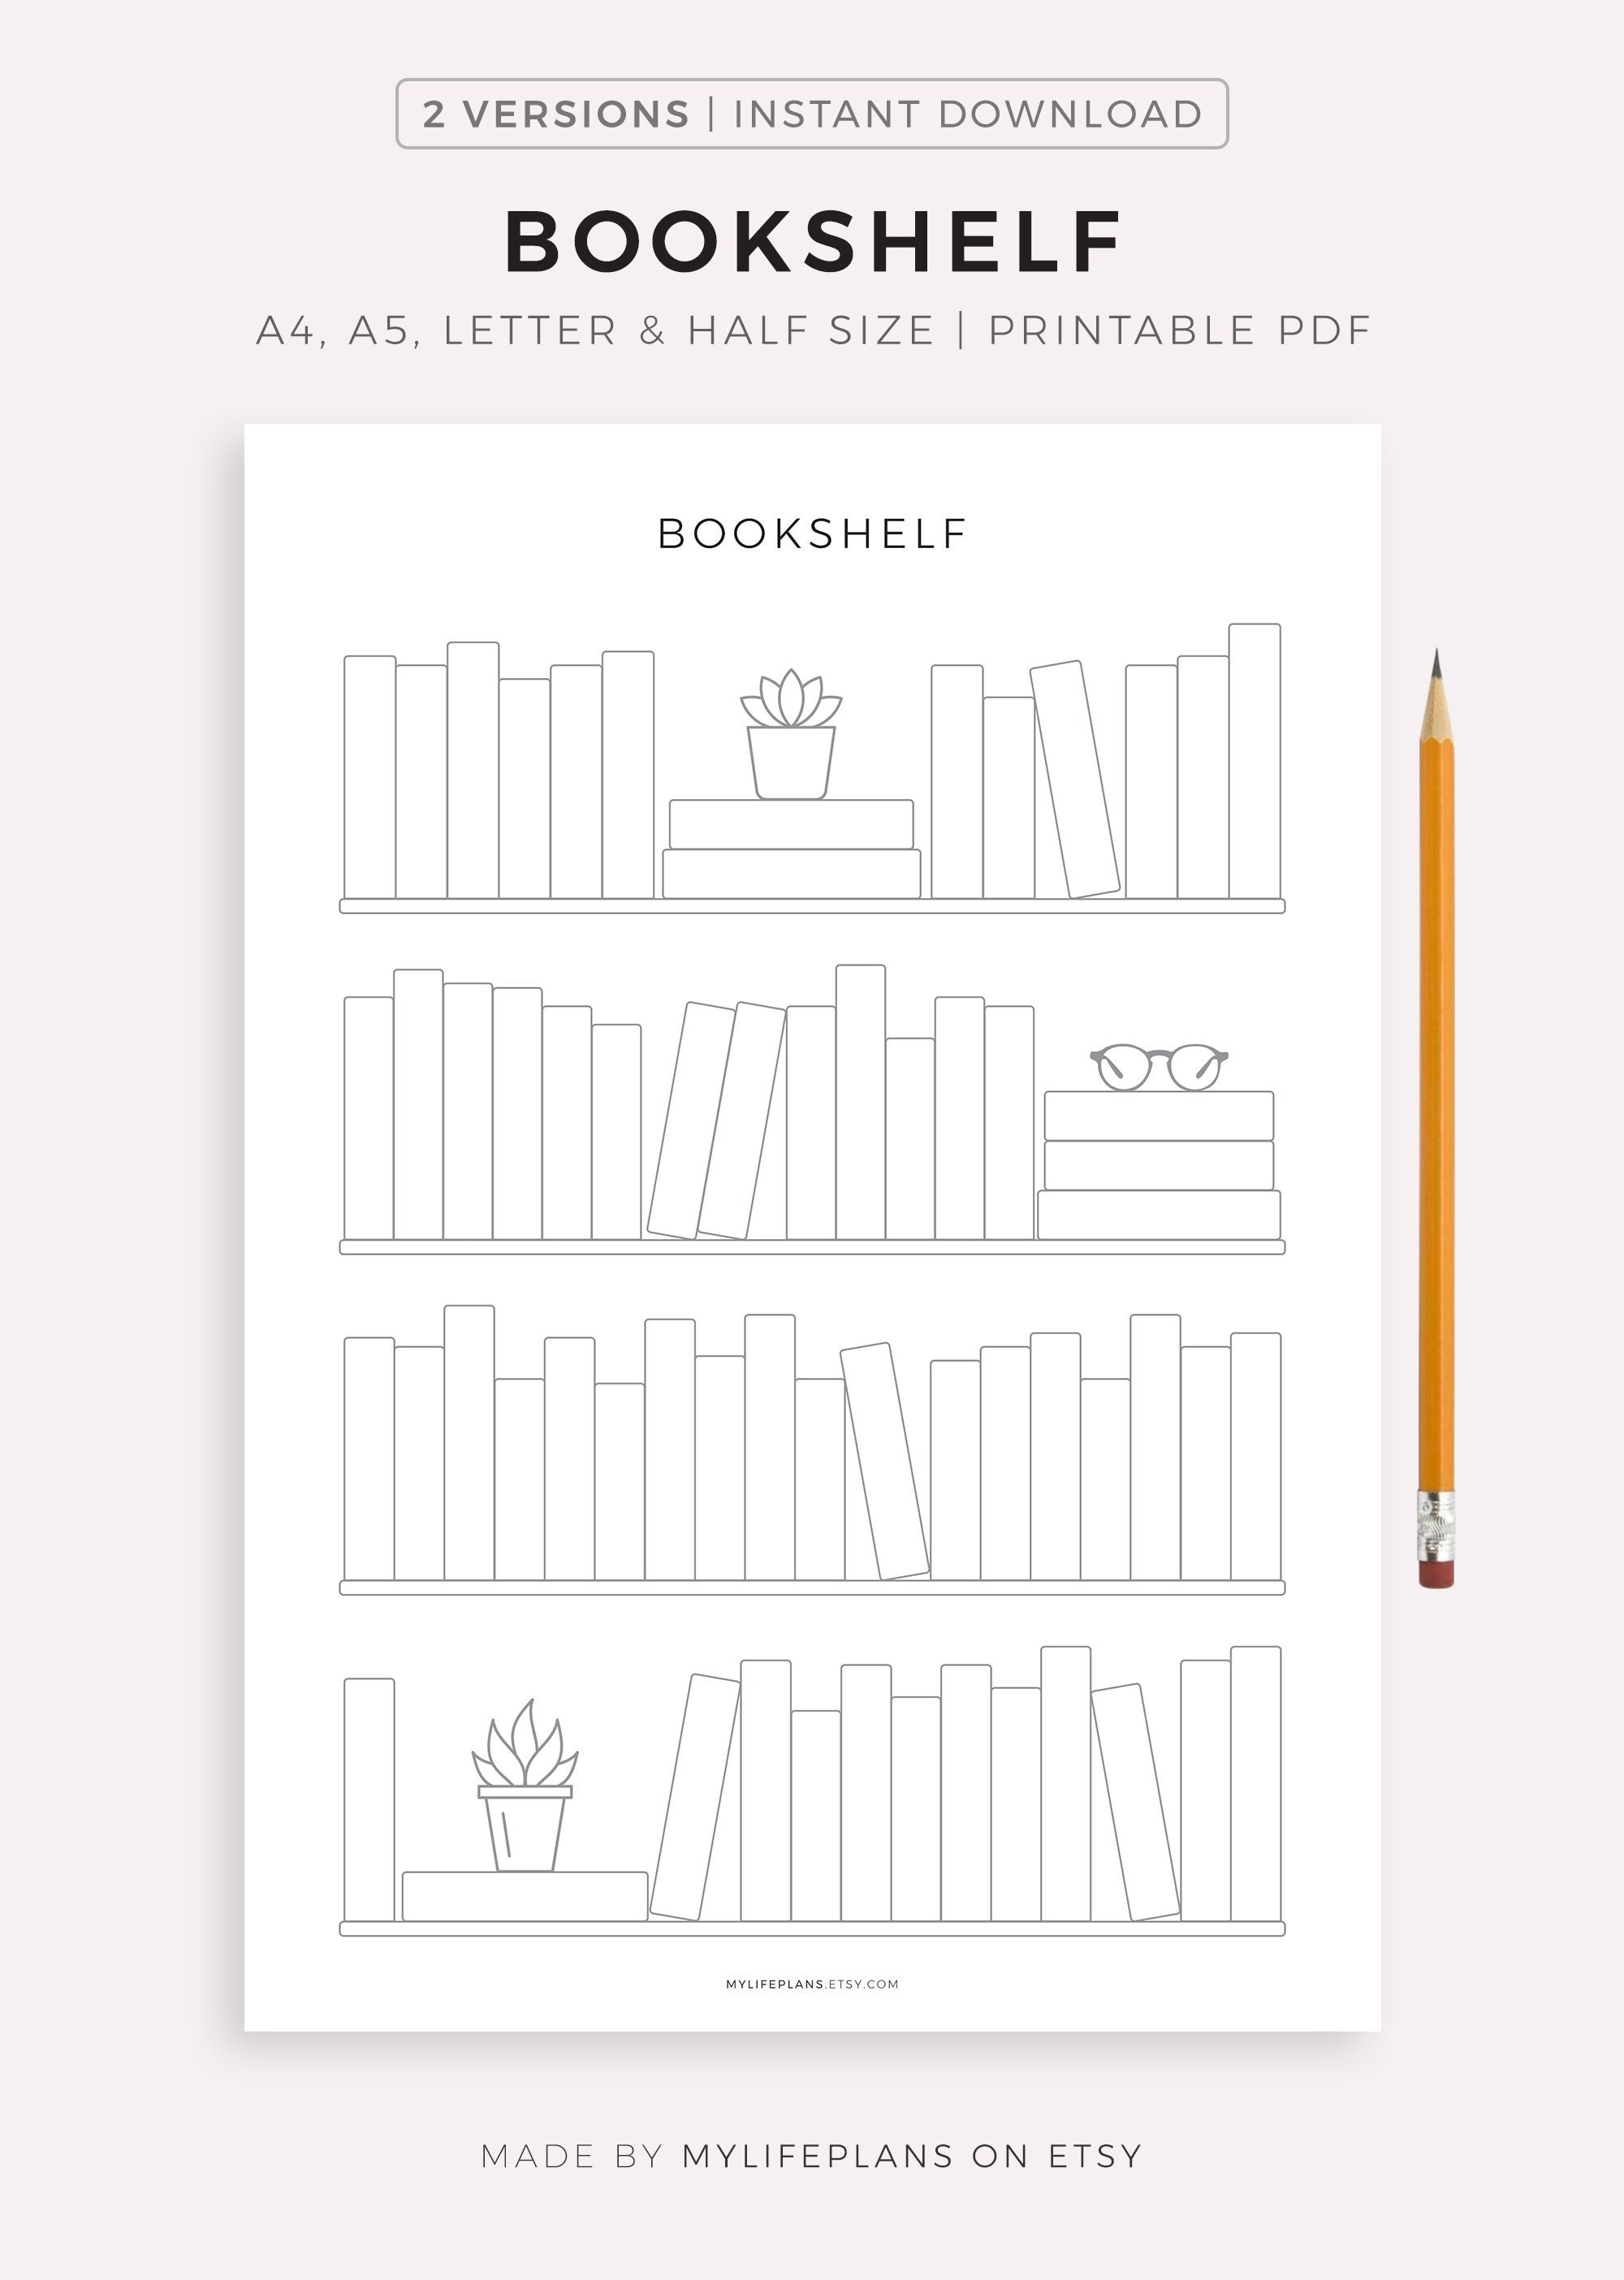 6 book tracker printables for kids with options for 100 to 1,000 books!